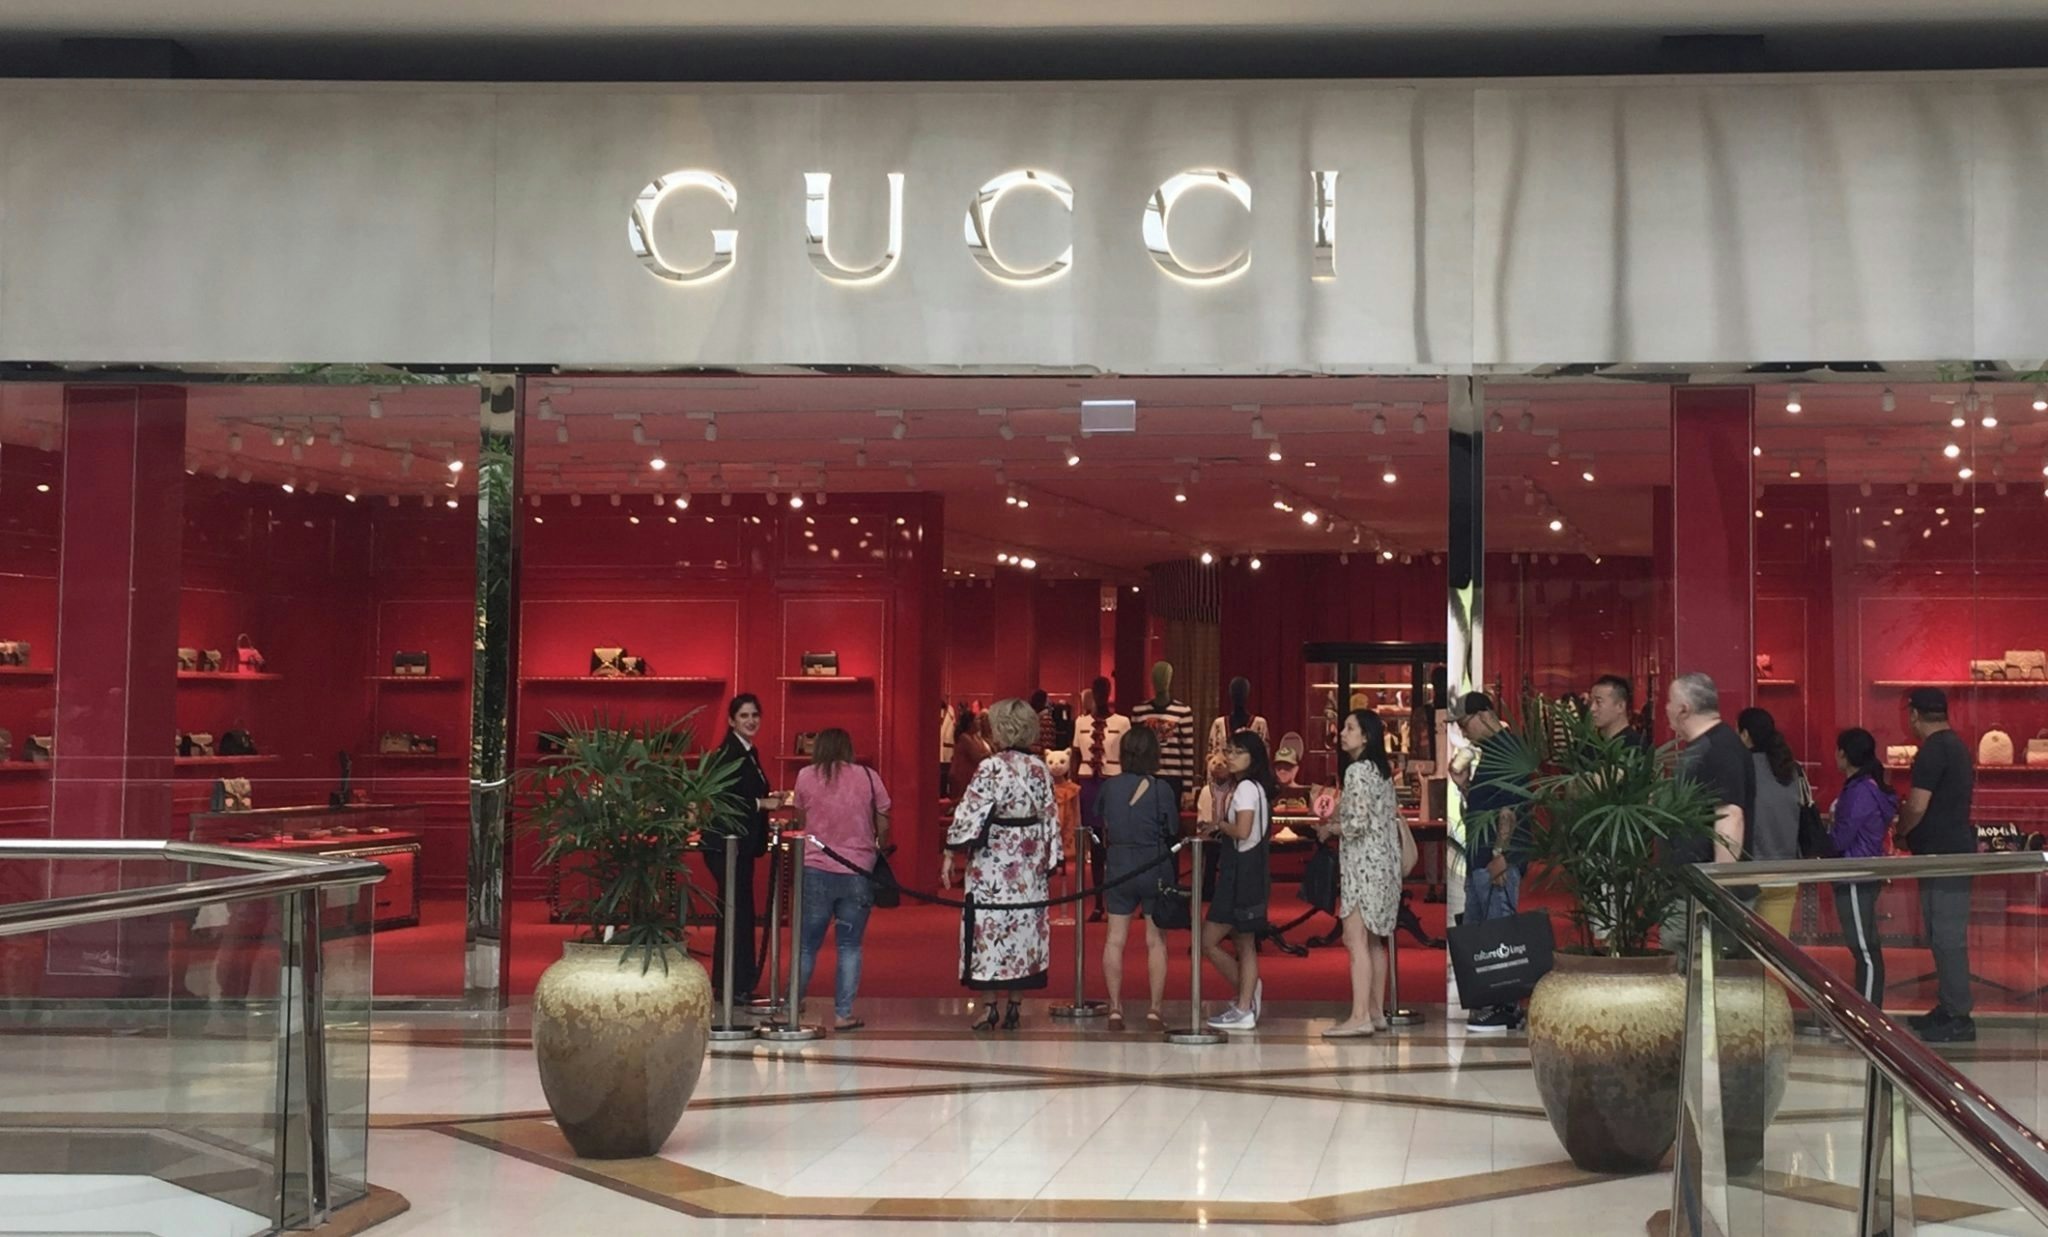 The Gucci Store at Chadstone Shopping Center. Photo: Jennifer Spark